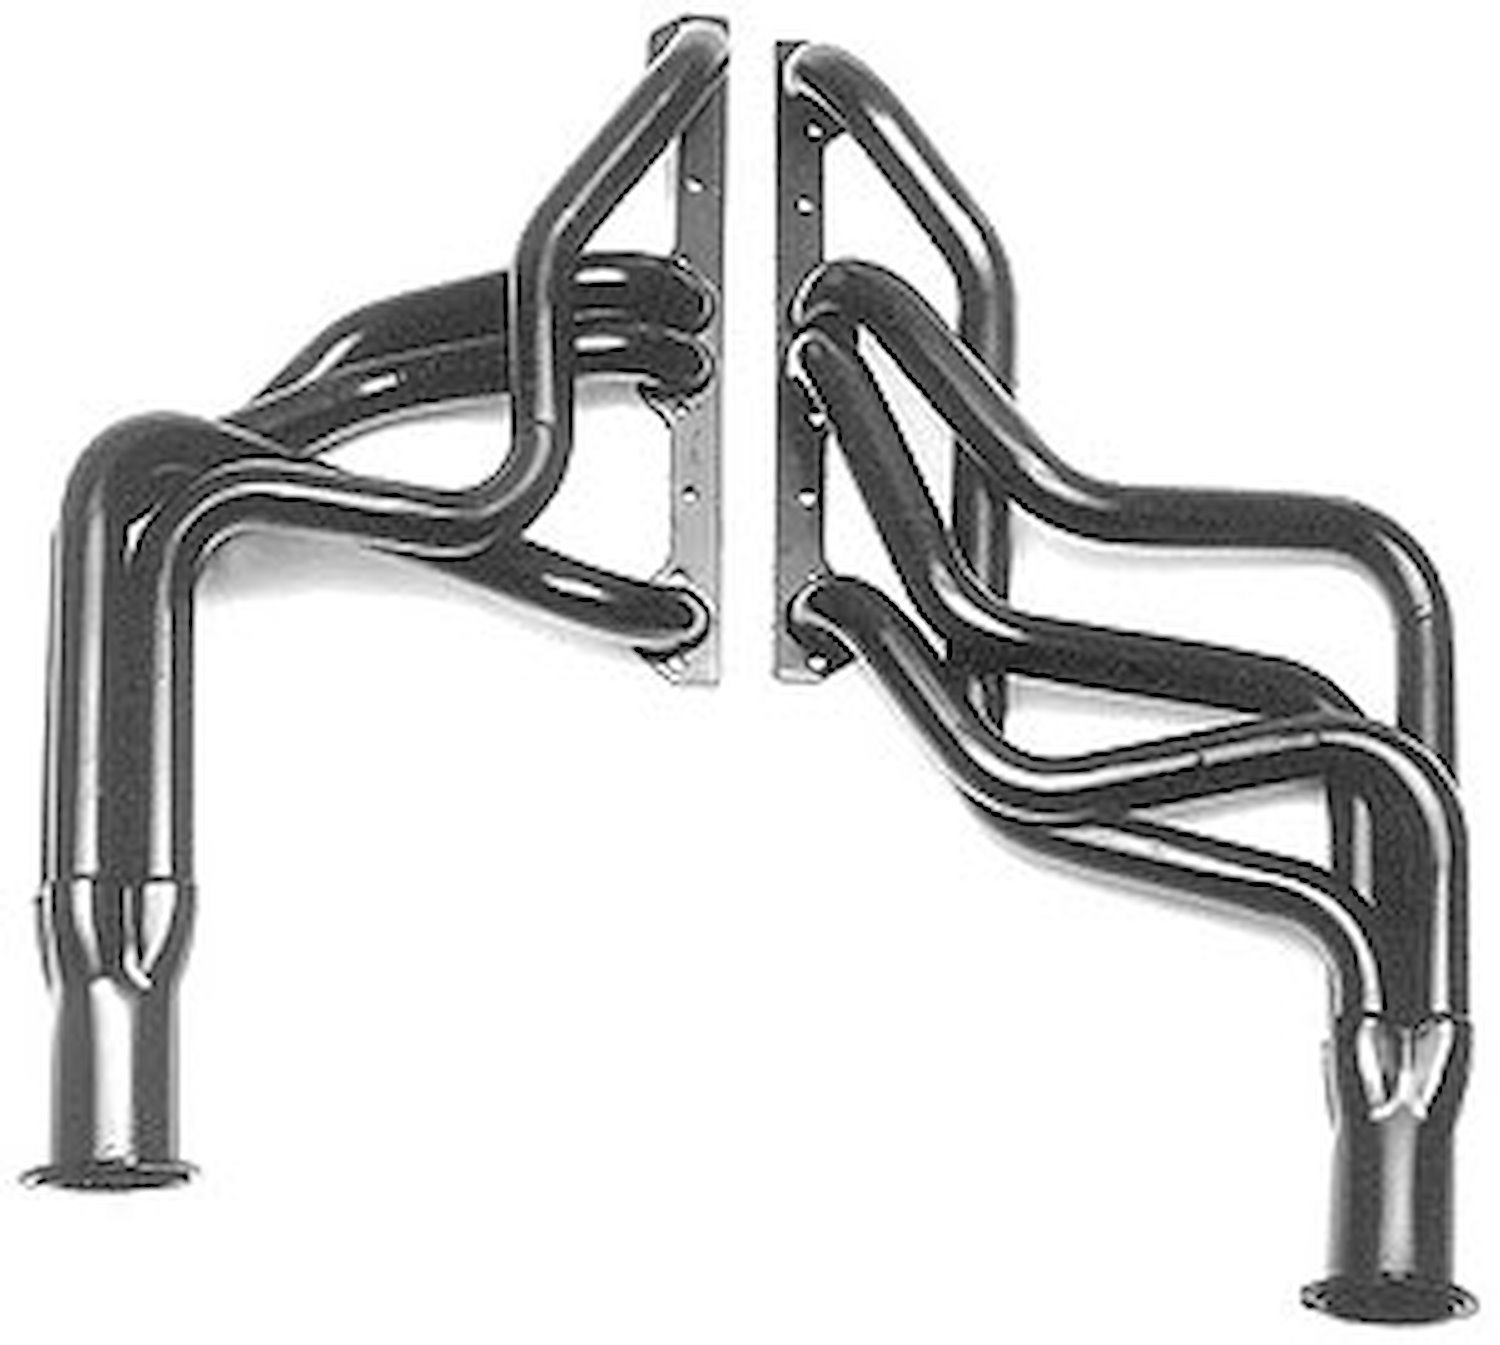 Standard Duty Uncoated Full Length Headers 1964-77 Chevelle,